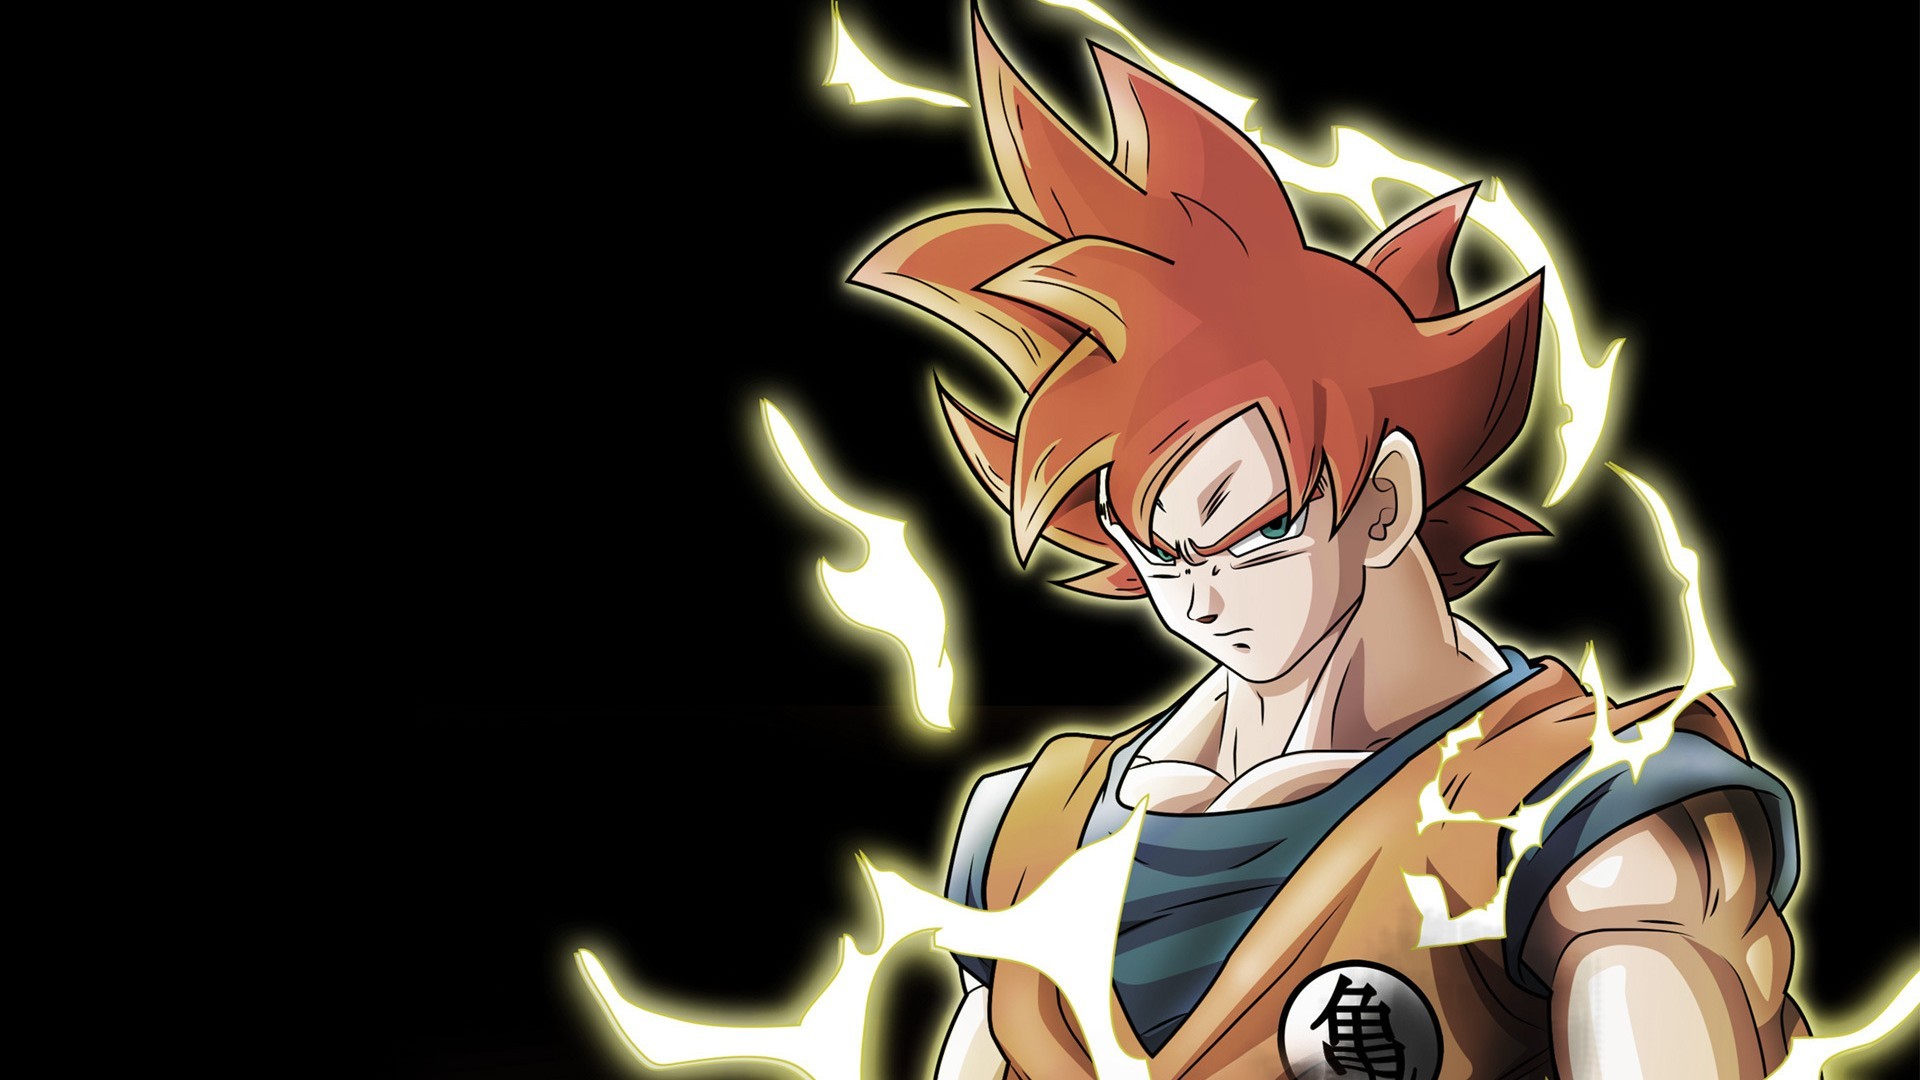 Goku Super Saiyan God HD Backgrounds with image resolution 1920x1080 pixel. You can make this wallpaper for your Desktop Computer Backgrounds, Mac Wallpapers, Android Lock screen or iPhone Screensavers